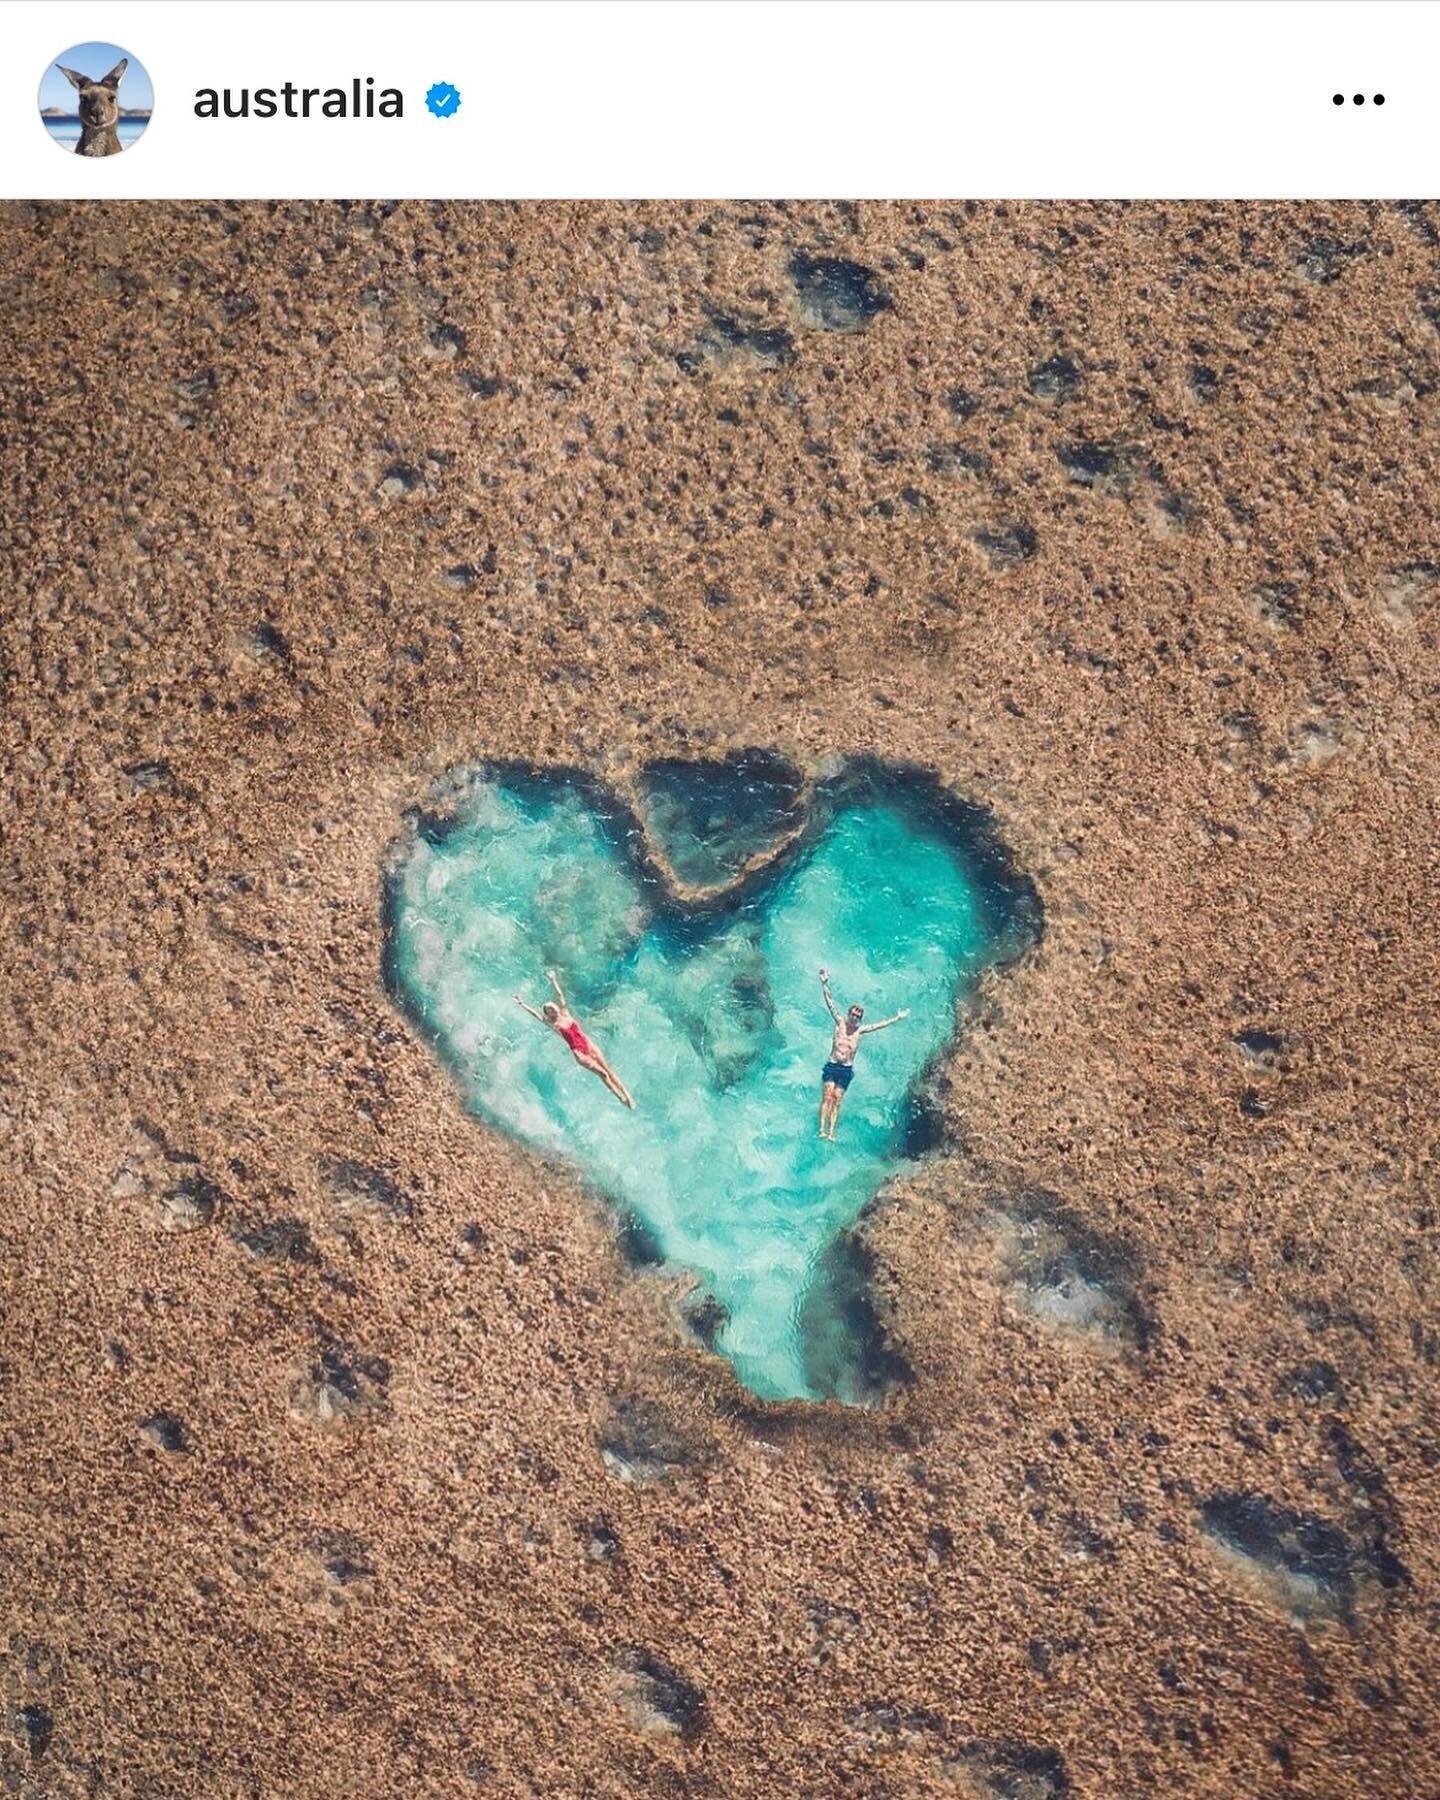 Happy Valentine&rsquo;s Day to all of our amazing clients!
Love is presented in so many ways - friendship, marriage, partnership, kindness&hellip;all of it.
So from us to you, happy love day ❤️ xx
📸 @australia